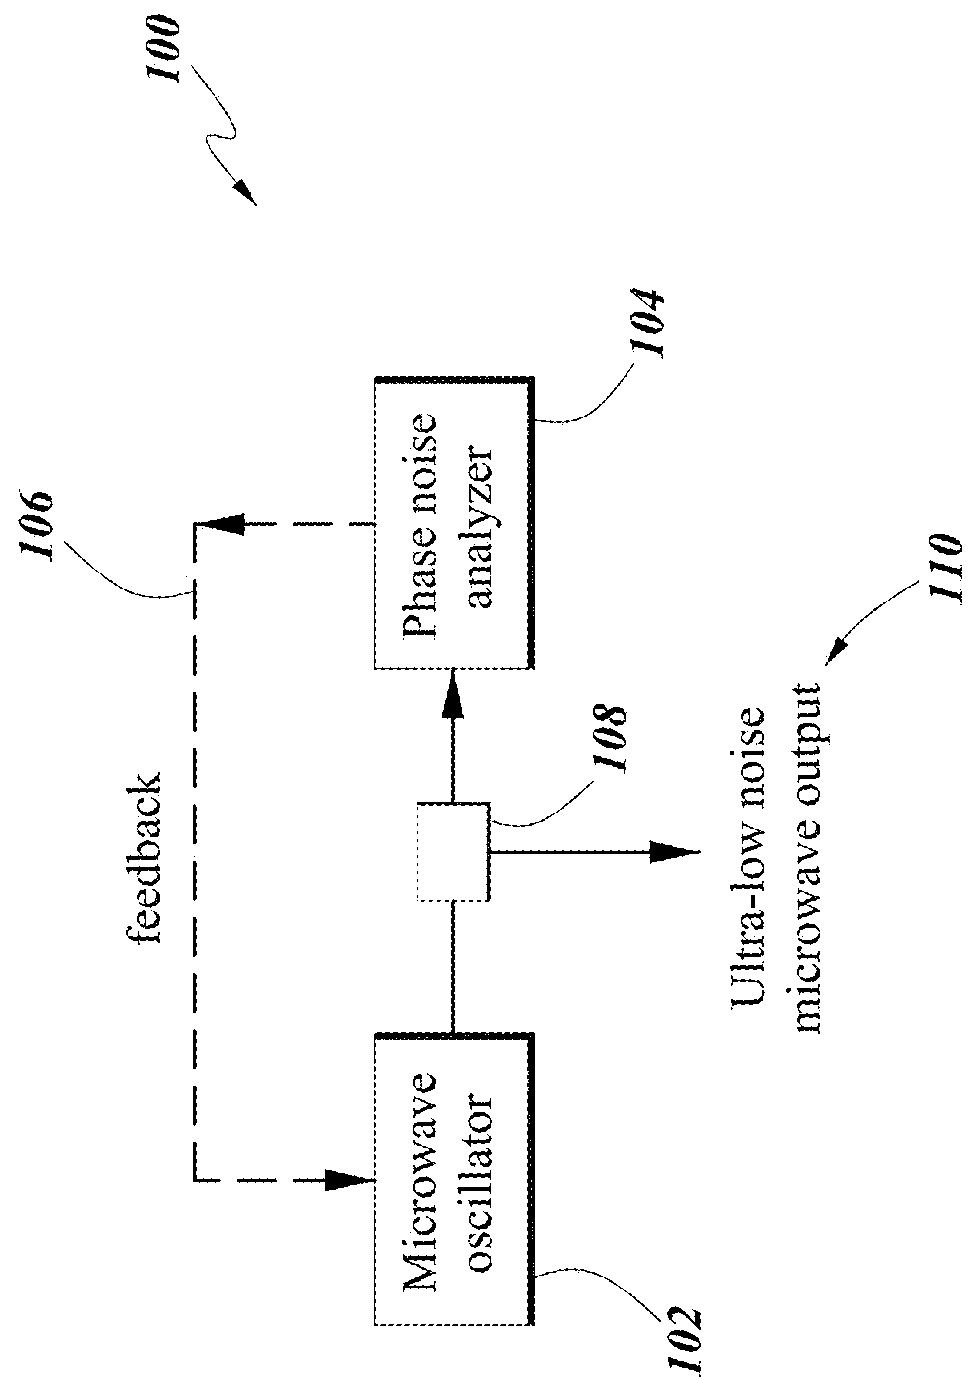 Ultra-low noise photonic phase noise measurement system for microwave signals